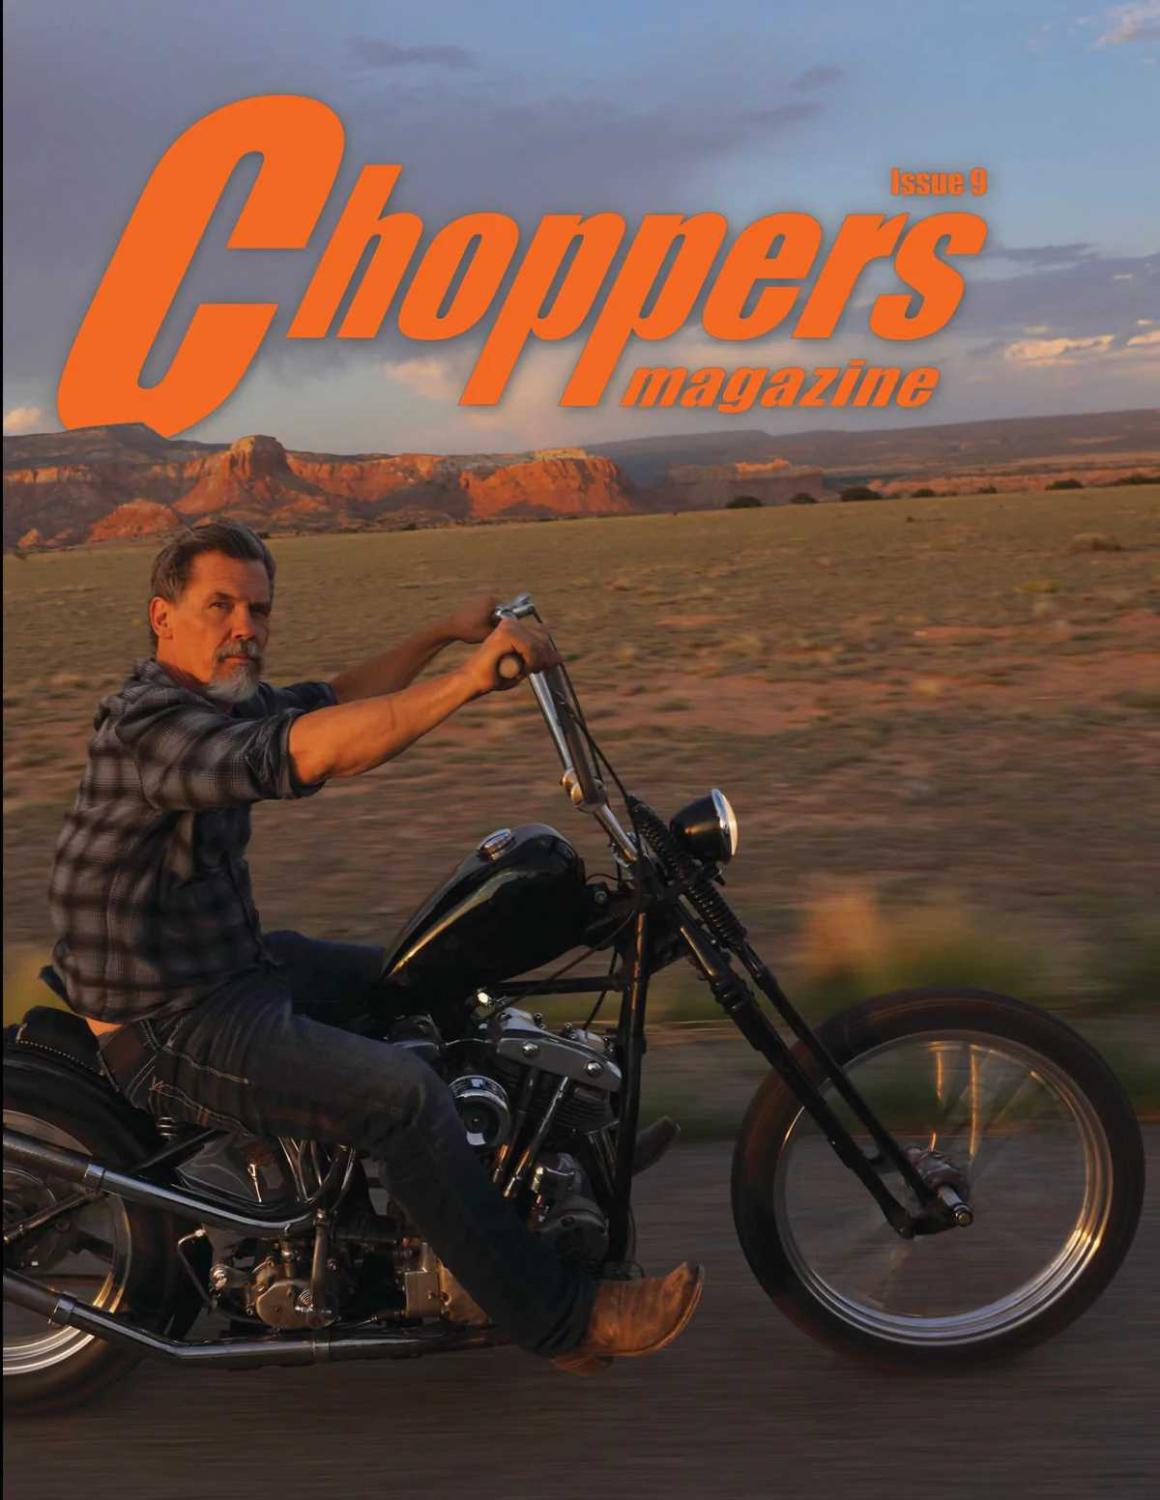 Choppers Magazine Issue 9